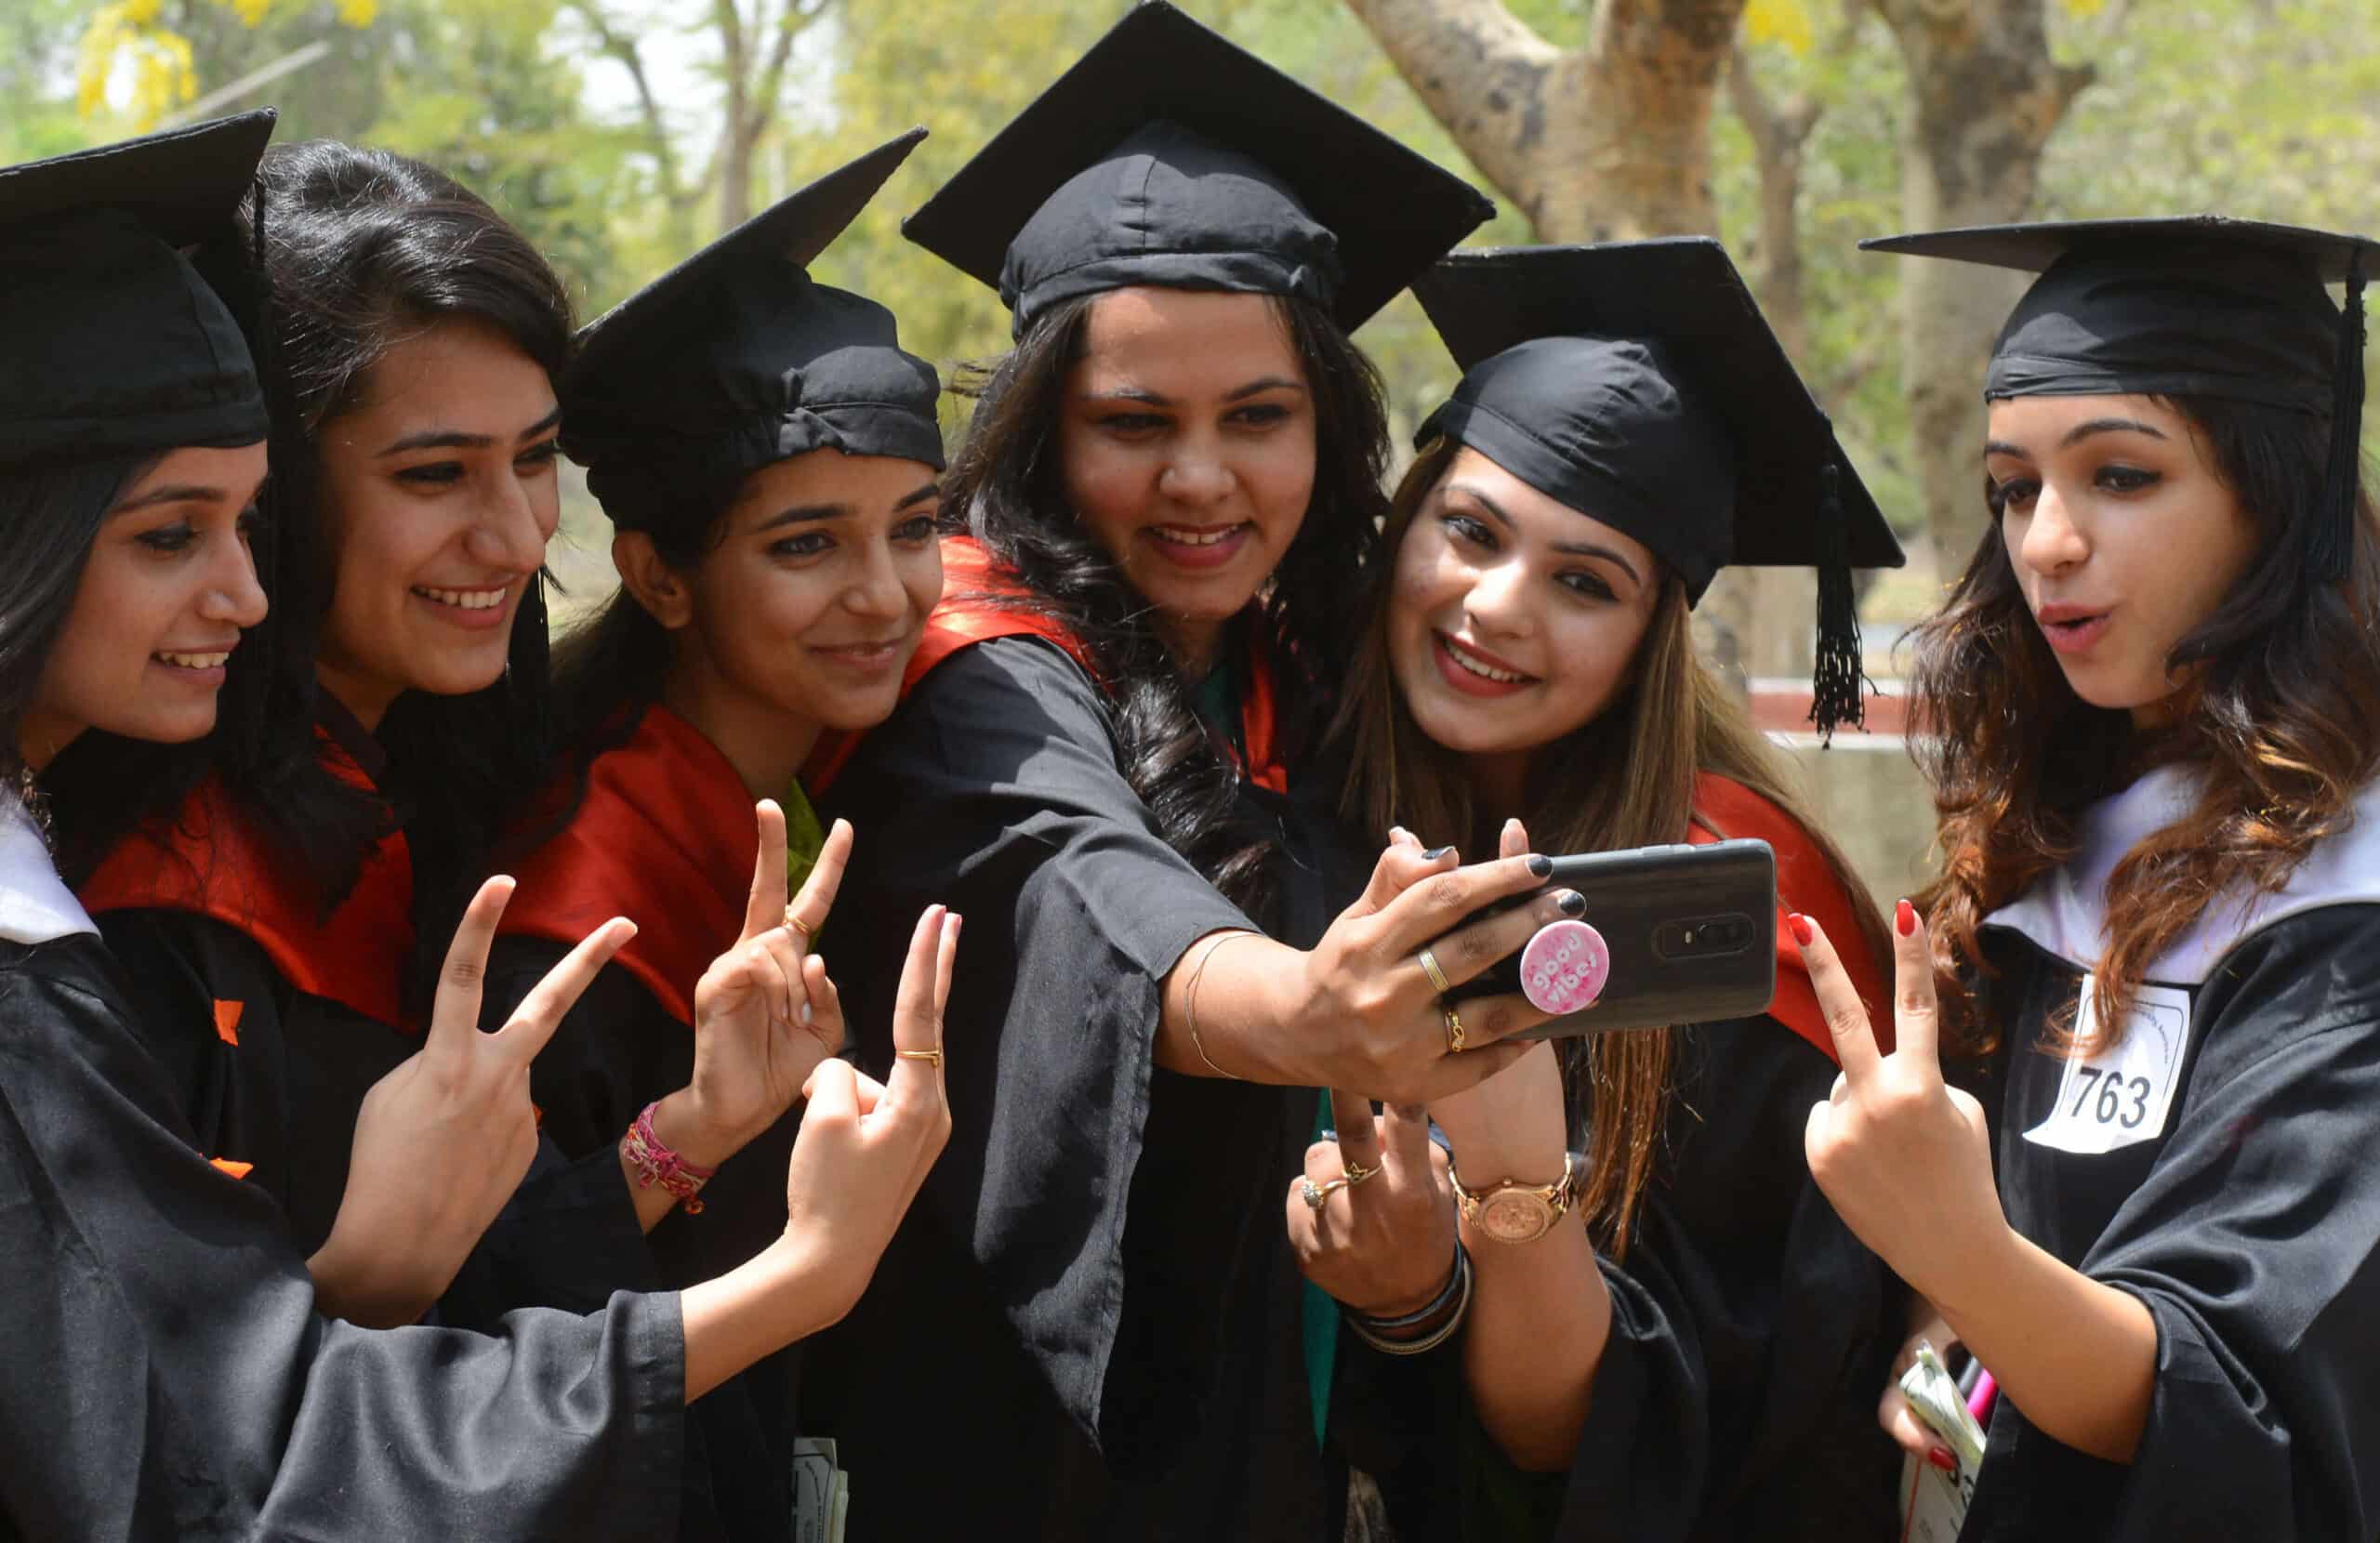 Stay or go: Comparing India’s top universities with the rest of the world